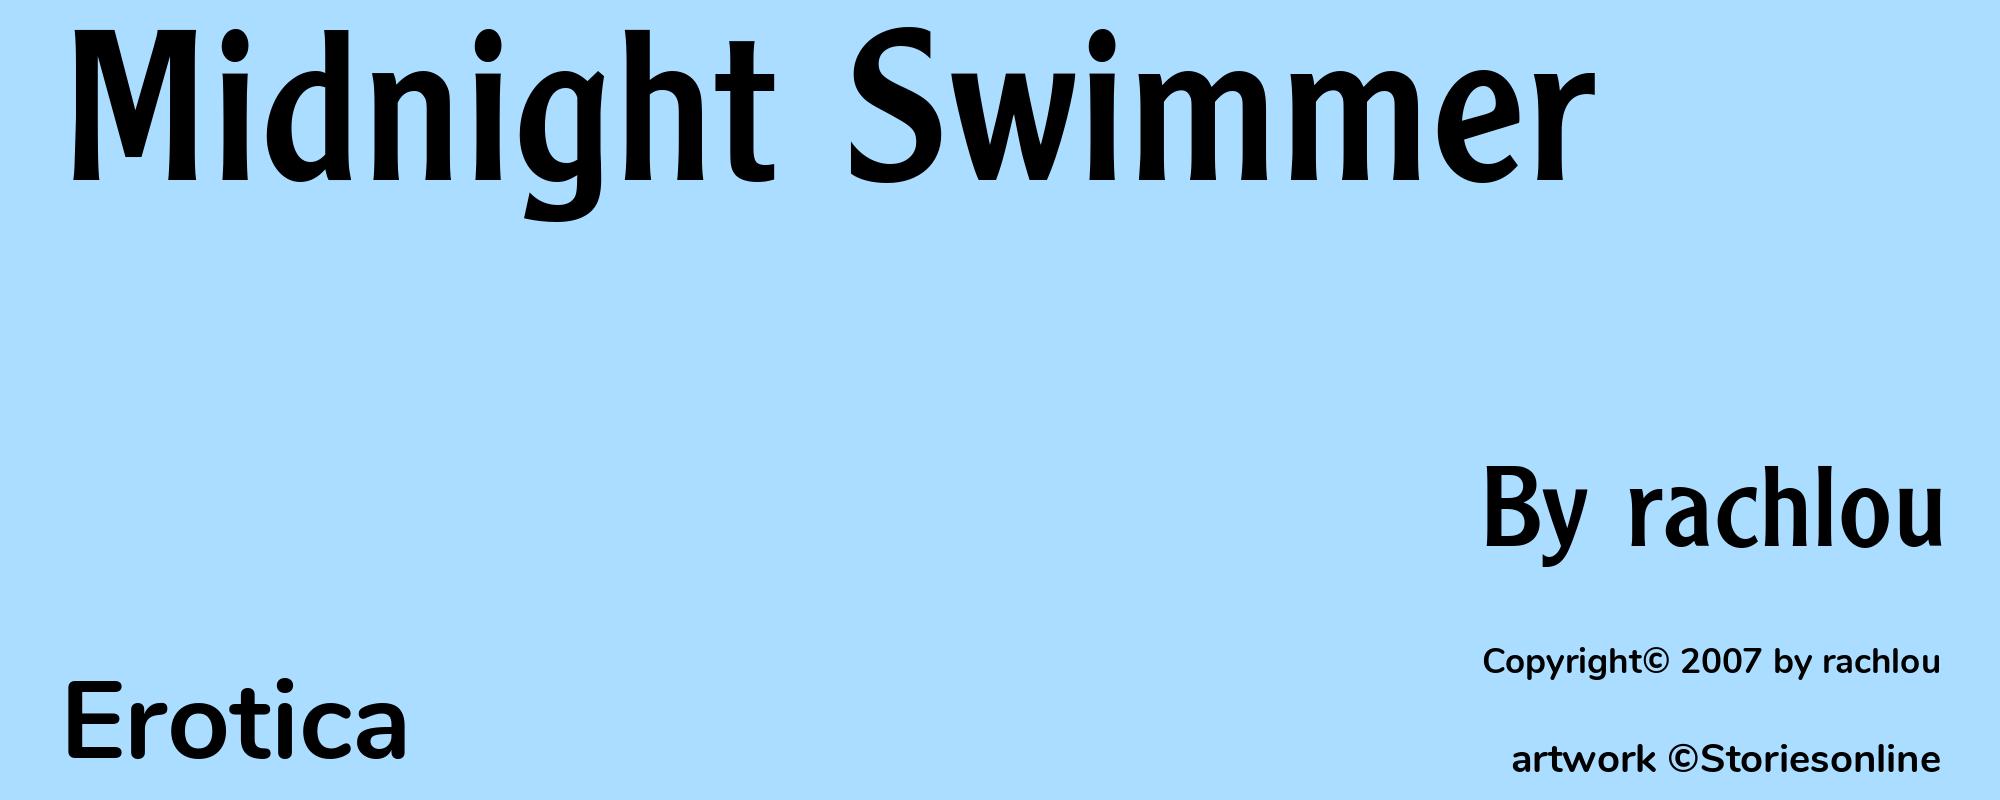 Midnight Swimmer - Cover